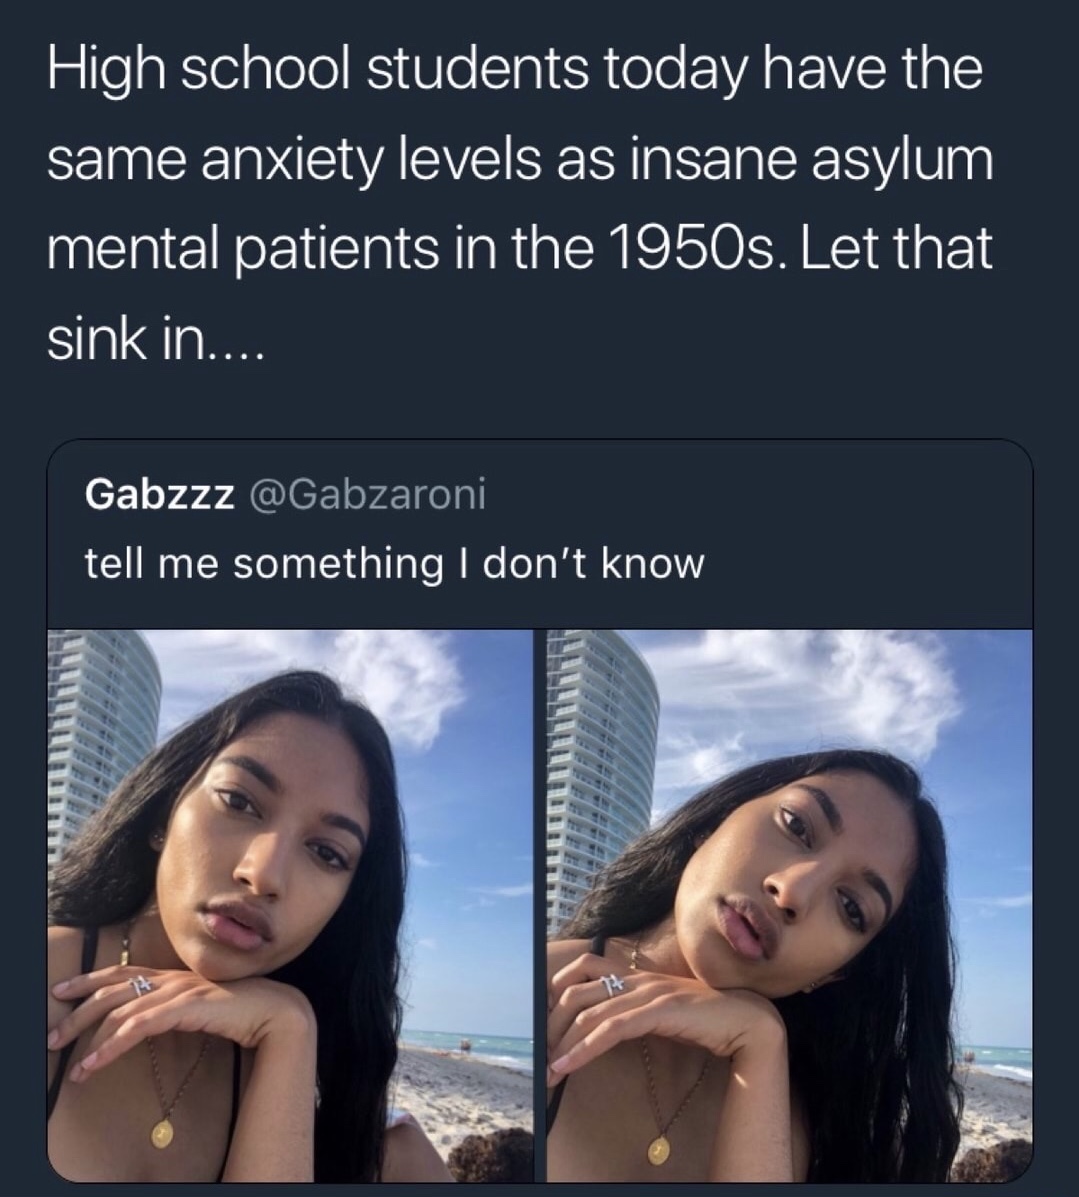 media - High school students today have the same anxiety levels as insane asylum mental patients in the 1950s. Let that sink in.... Gabzzz tell me something I don't know